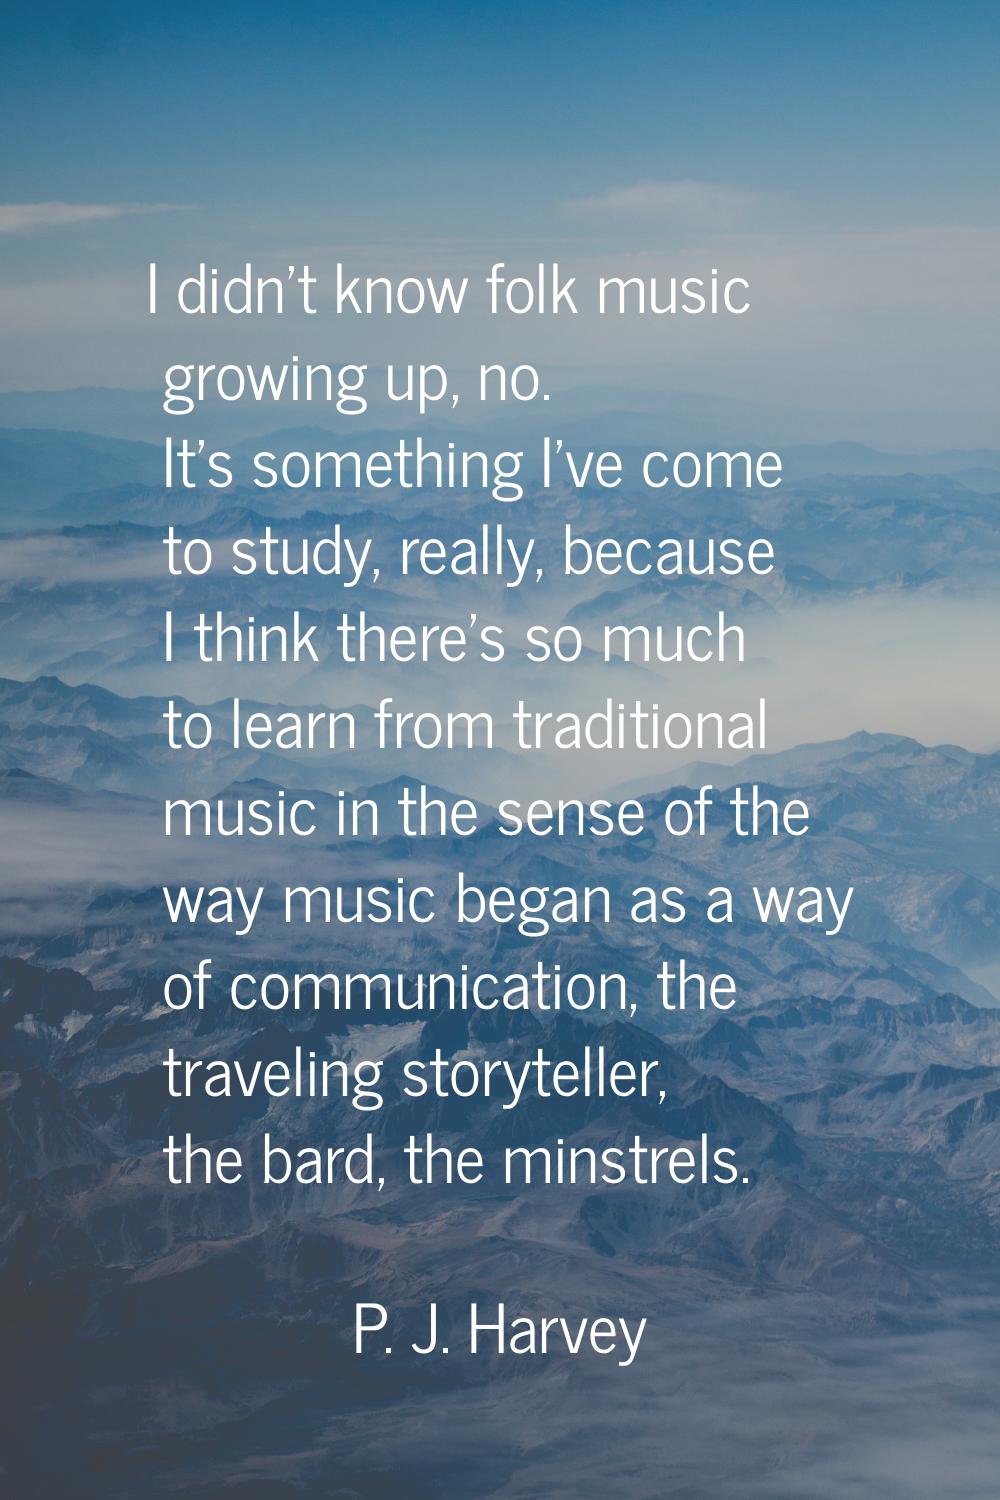 I didn't know folk music growing up, no. It's something I've come to study, really, because I think